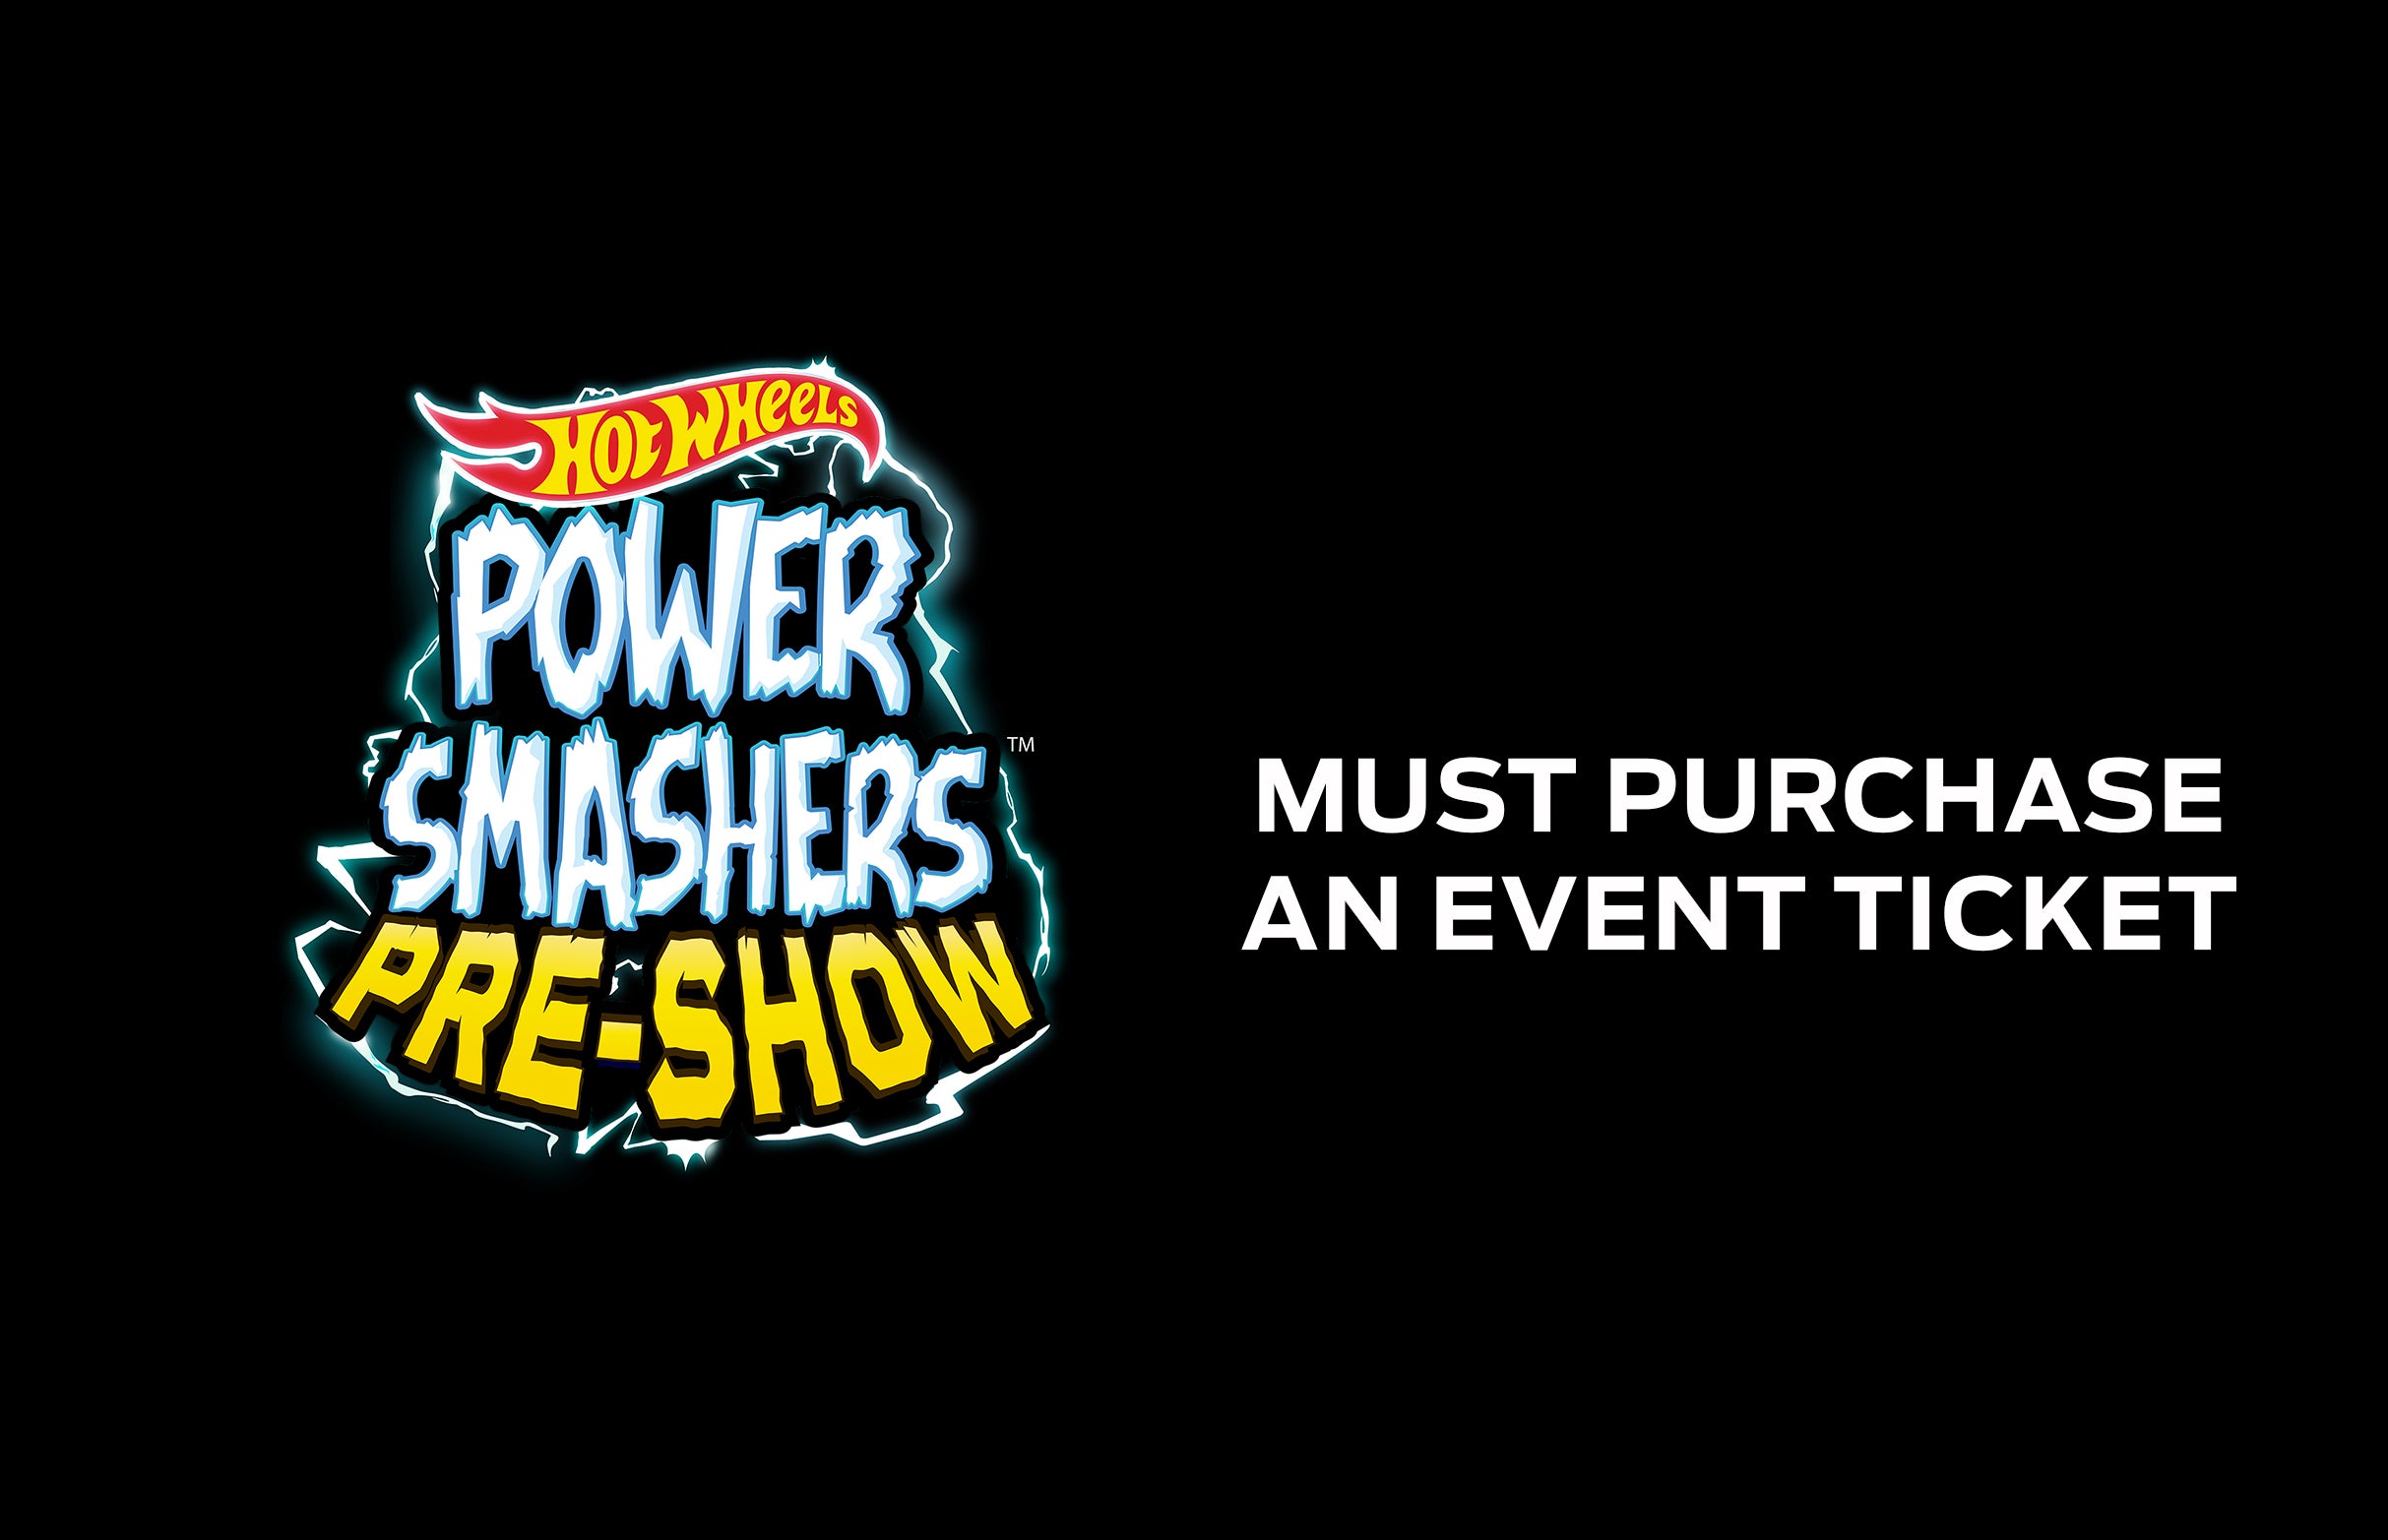 Hot Wheels Power Smashers Pre-Show starts at 10am presales in Indianapolis